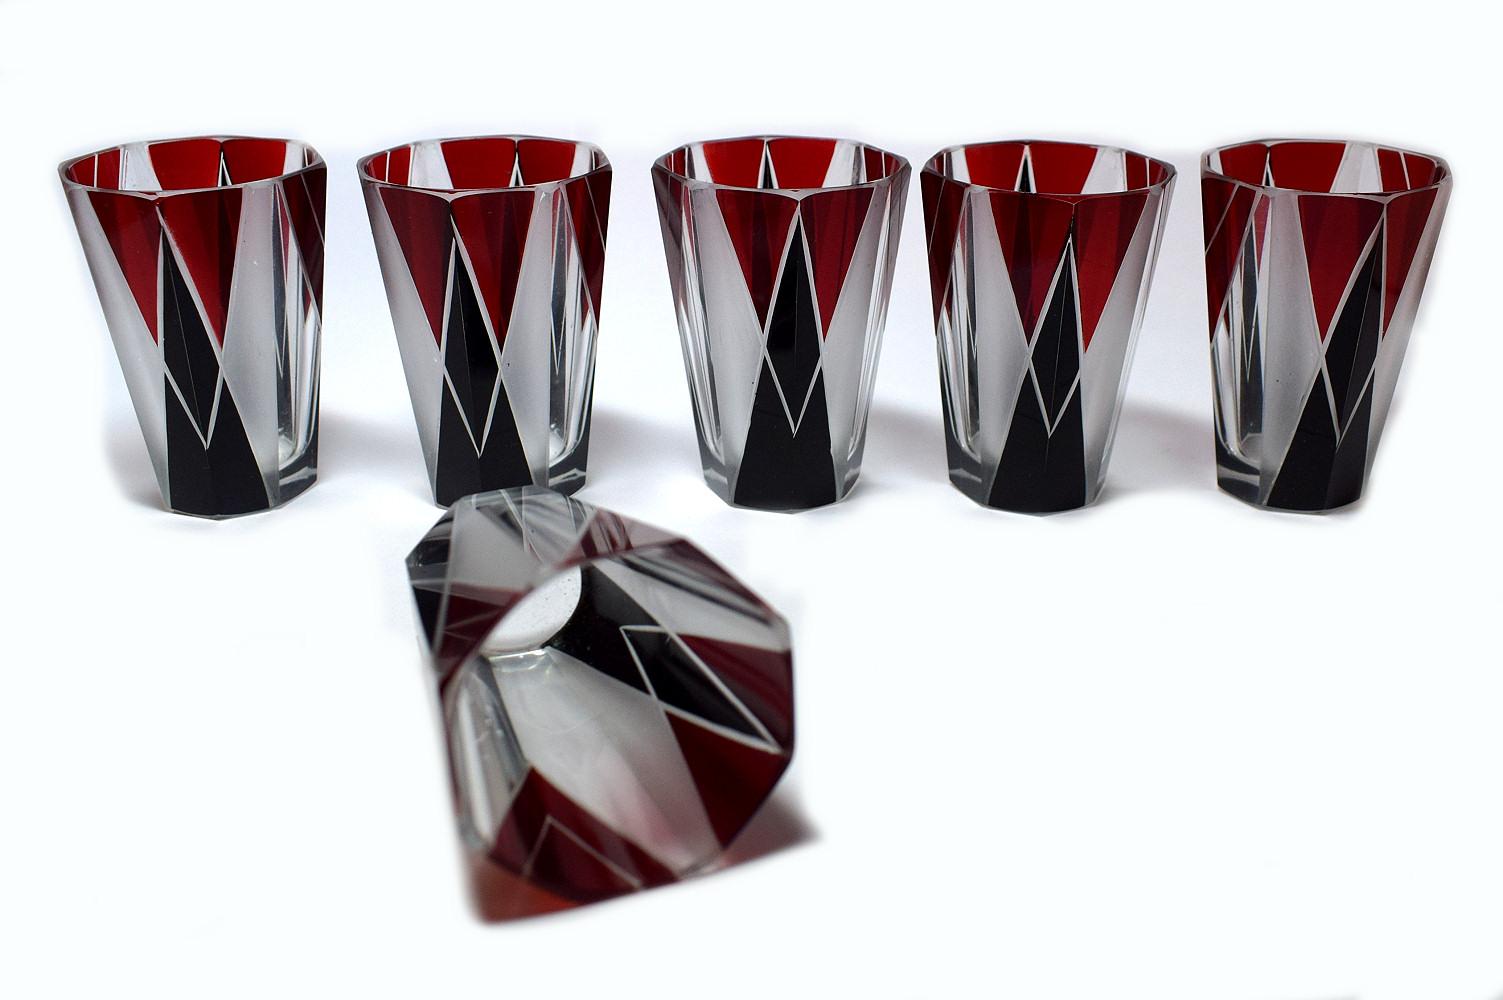 Art Deco 1930s Czech decanter set in clear glass with black and deep red enamel decoration. The decanter comes with six matching glasses, the whole being heavily enamelled with geometric decoration. The lid is made from metal and just slots on top,